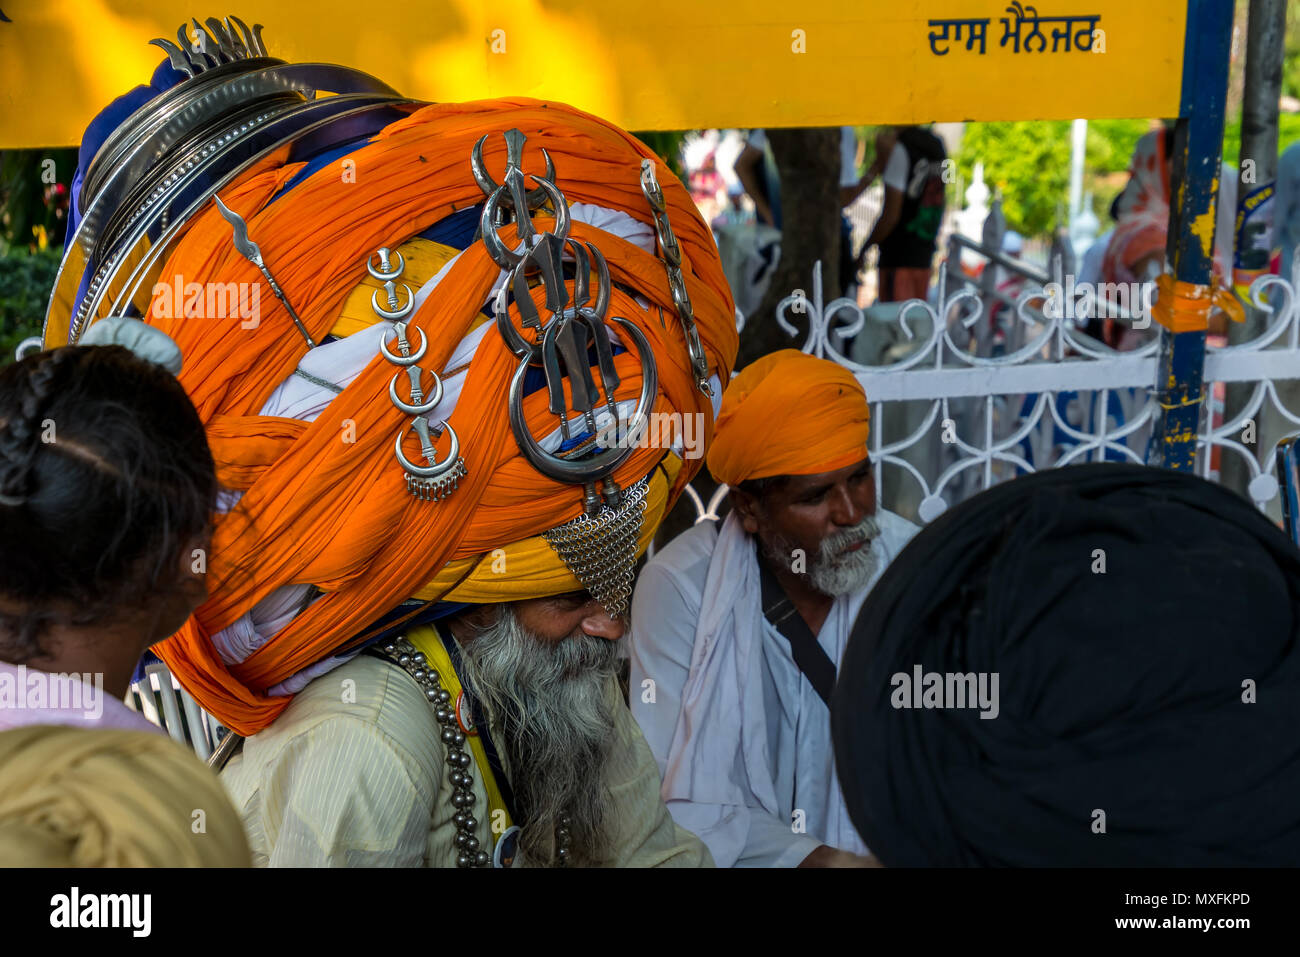 Sikh, with a huge turban on his head and religious symbols of the Sikh, sits surrounded by other men dressed in turbans. India July 2017 Stock Photo